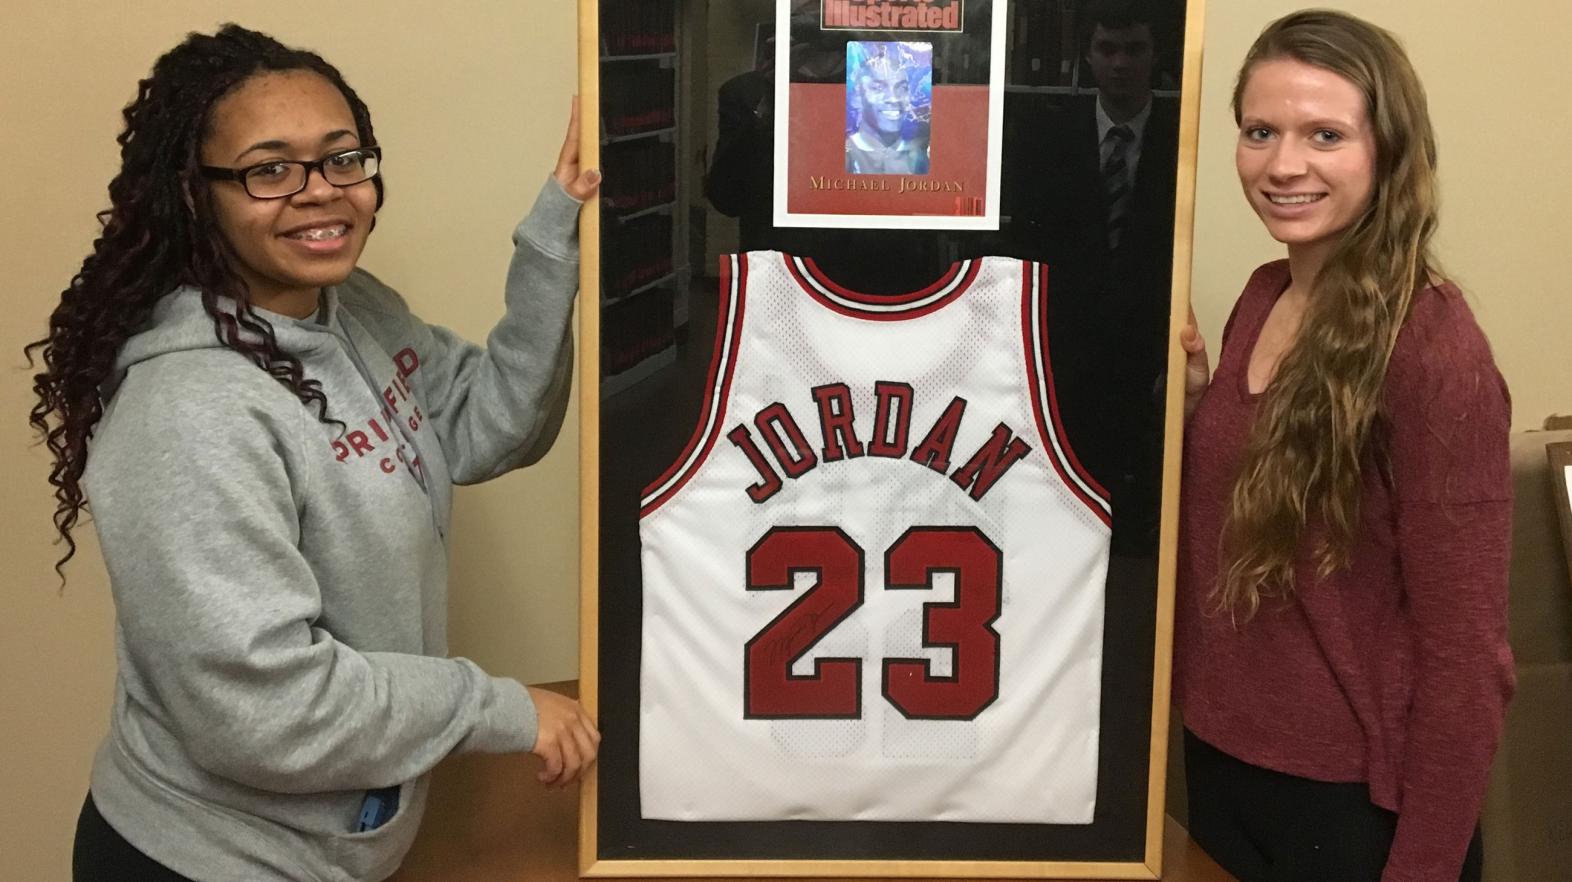 Students pose with a framed Michael Jordan Jersey, located in the Springfield College archives.